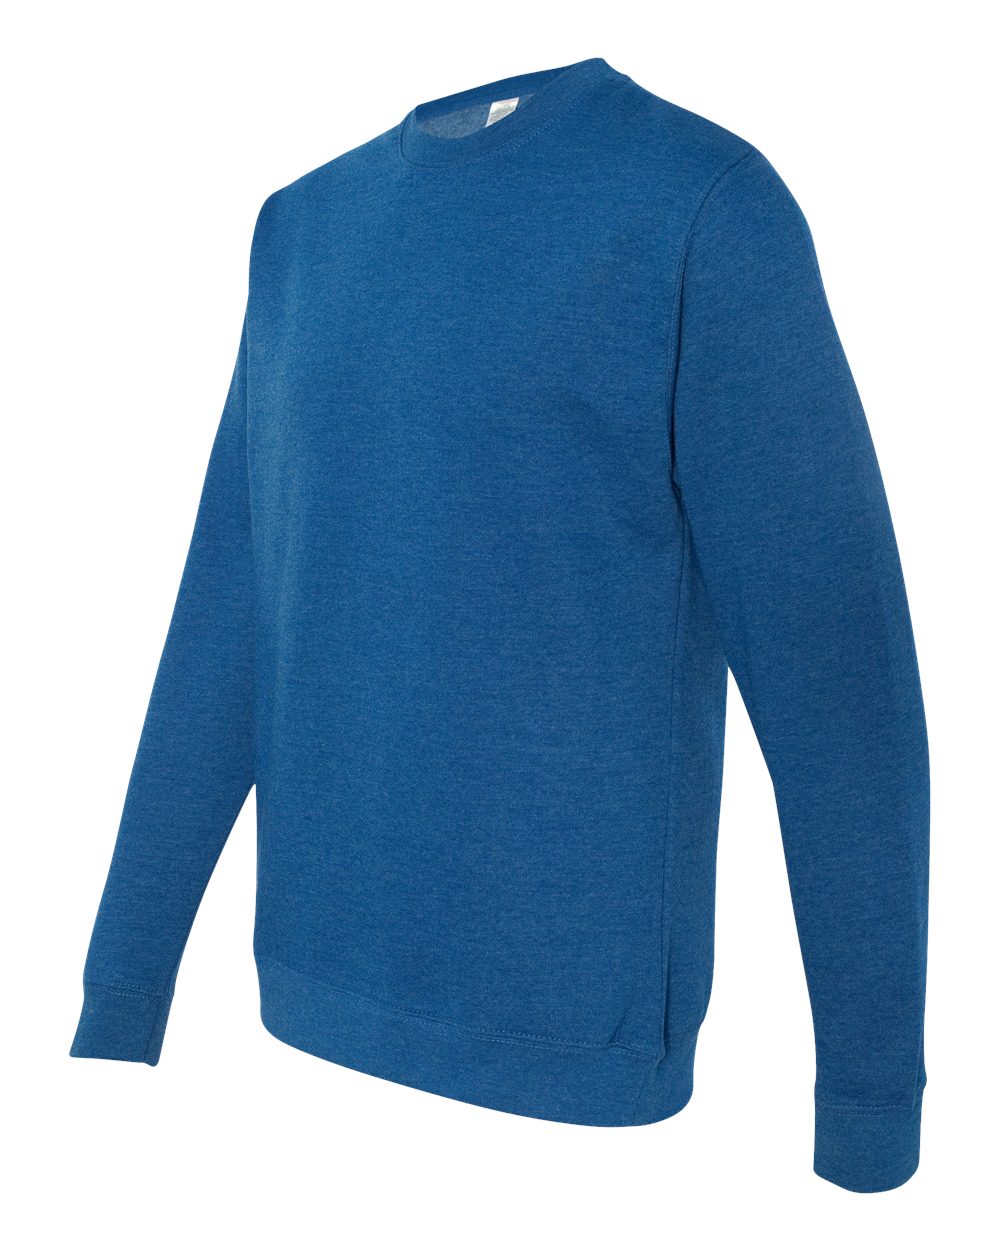 Independent Trading Co. SS3000 Midweight Sweatshirt - ACU PLUS